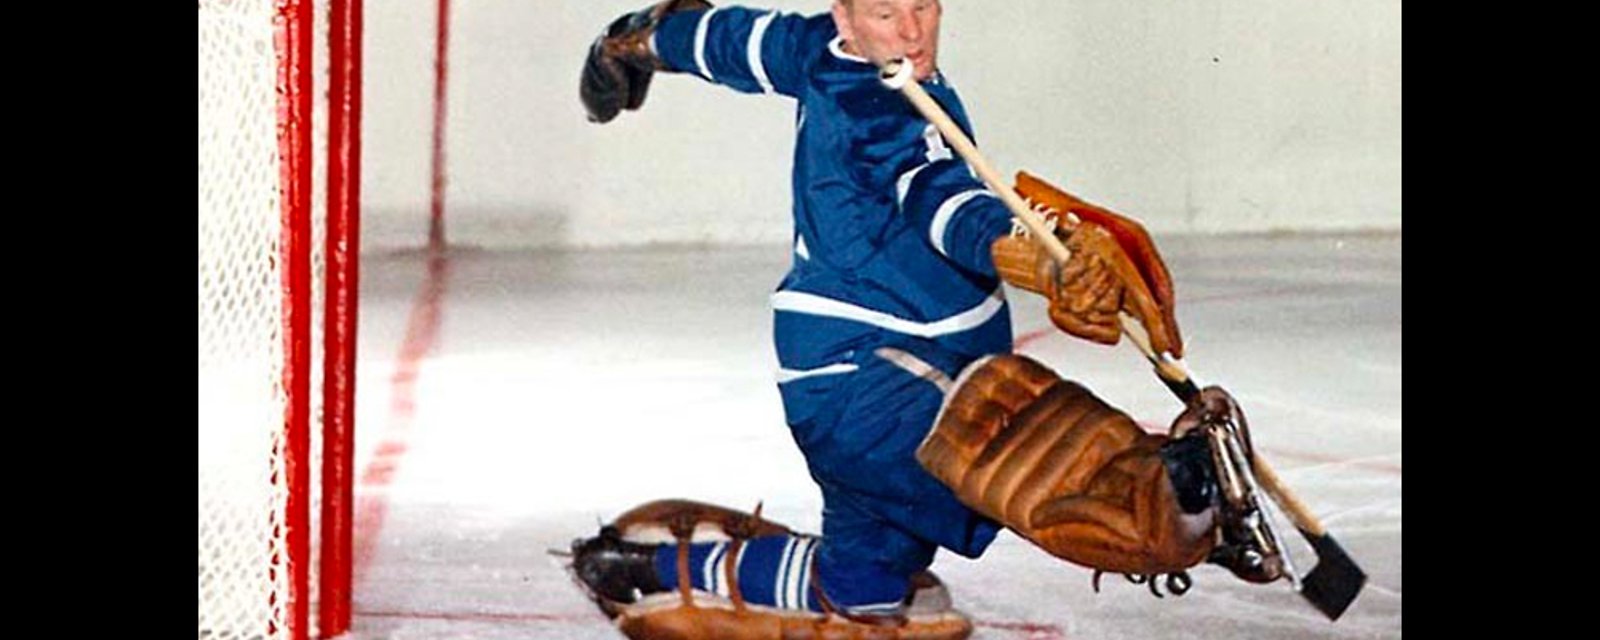 The crazy story of how a 15 year old Johnny Bower snuck into the Canadian military